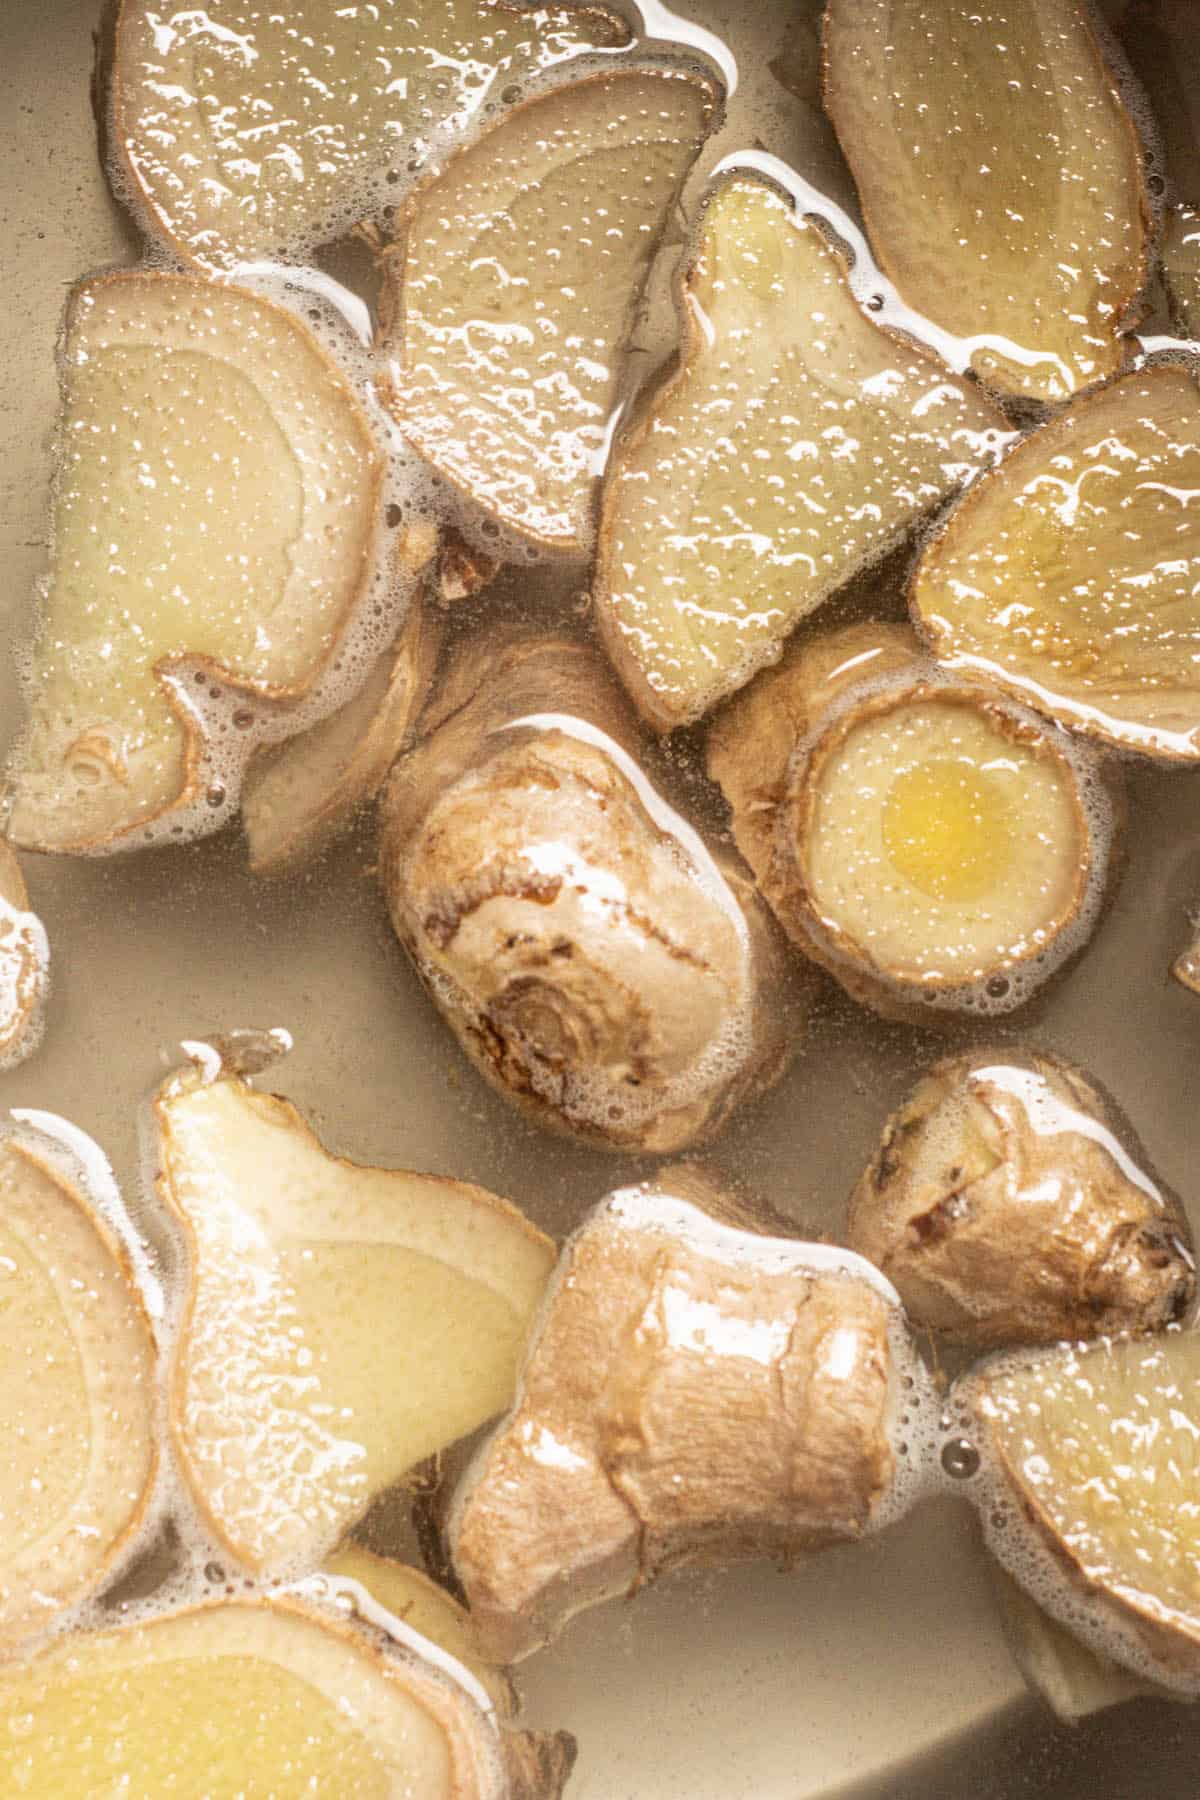 ginger root in water.